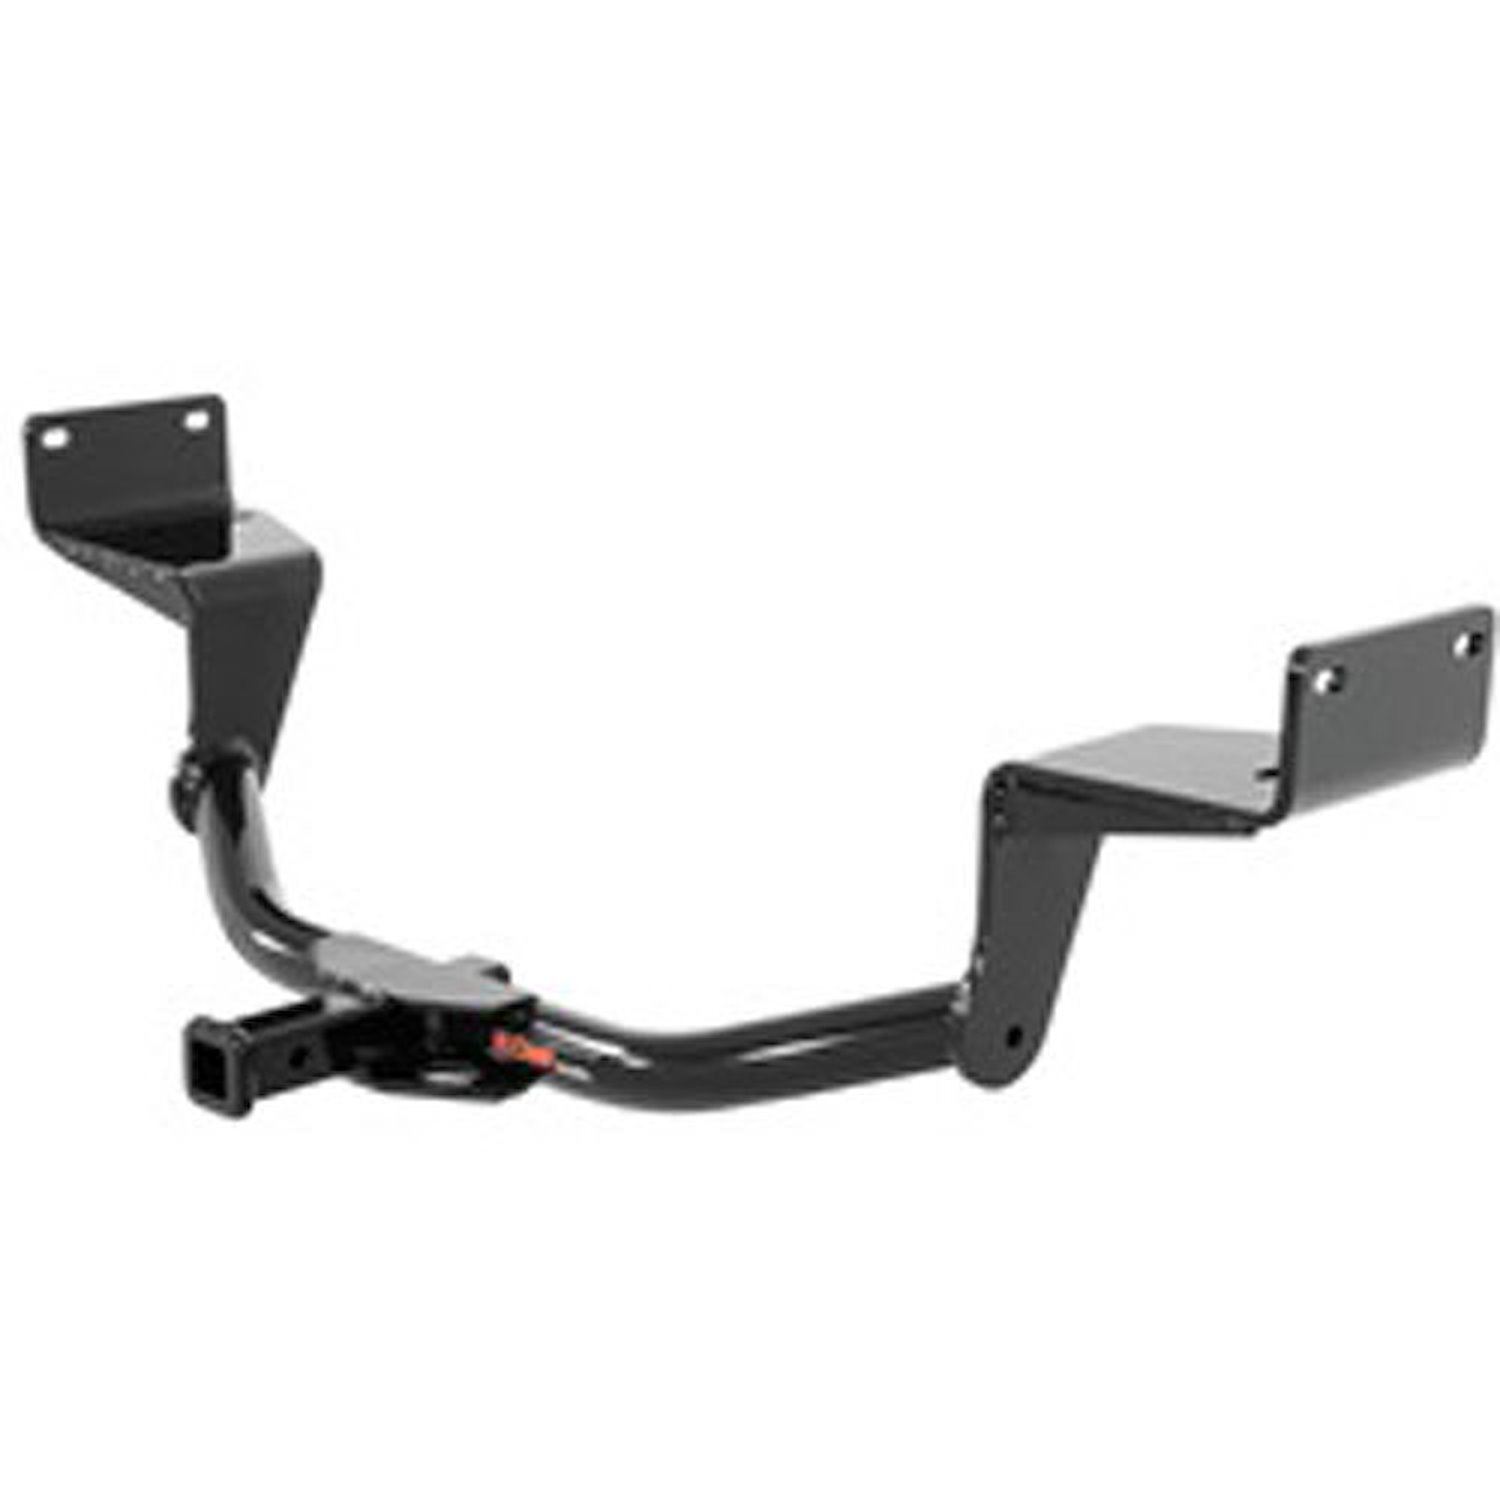 Class 1 Trailer Hitch 2015.0 - 2015.0 Ford